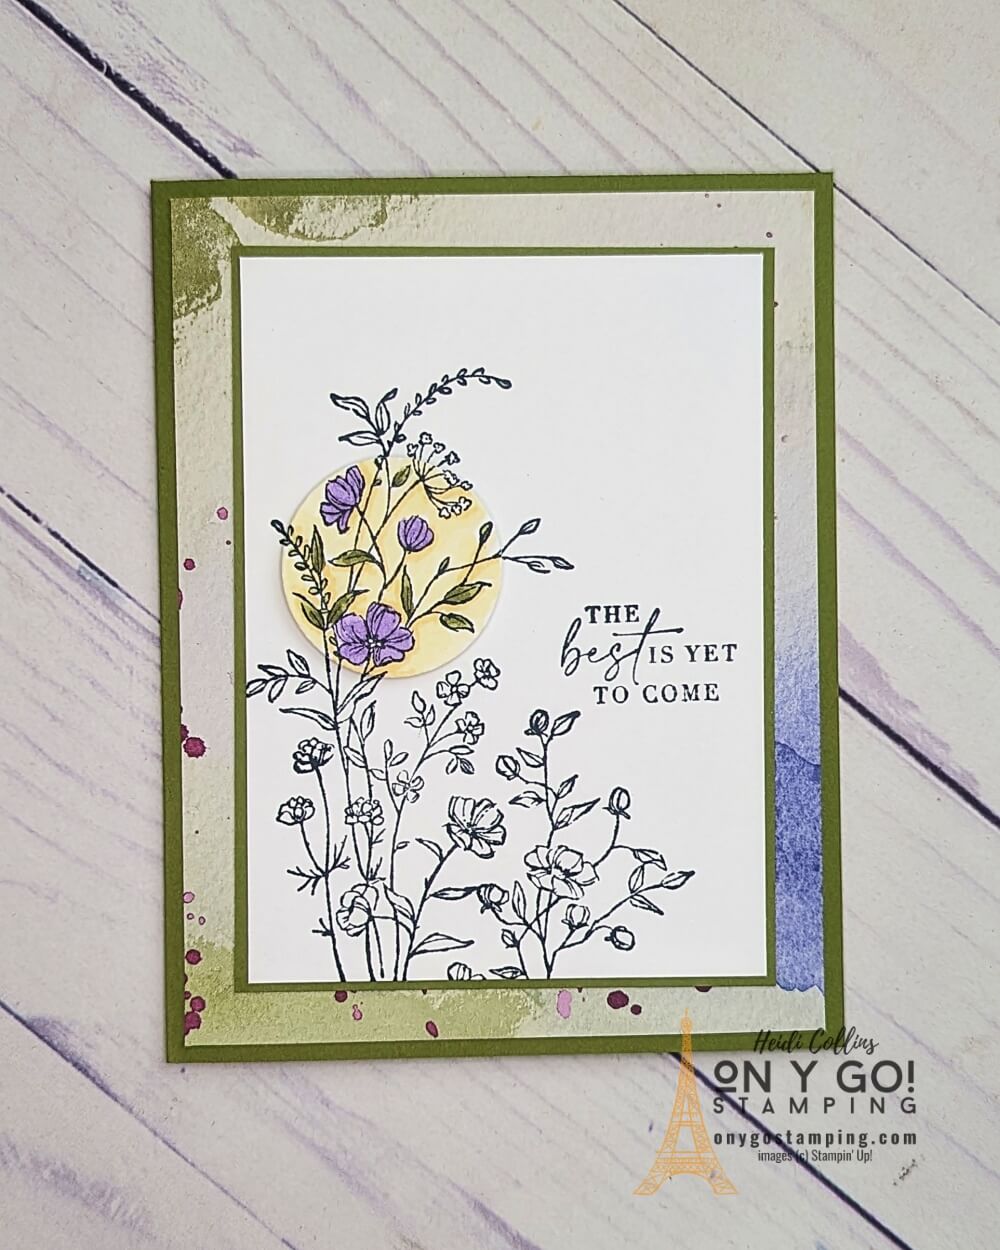 The NEW Dainty Delights stamp set from Stampin' Up! features gorgeous flowers that work perfectly with the spotlighting card making technique. Get a FREE Quick Reference guide on how to do this technique!